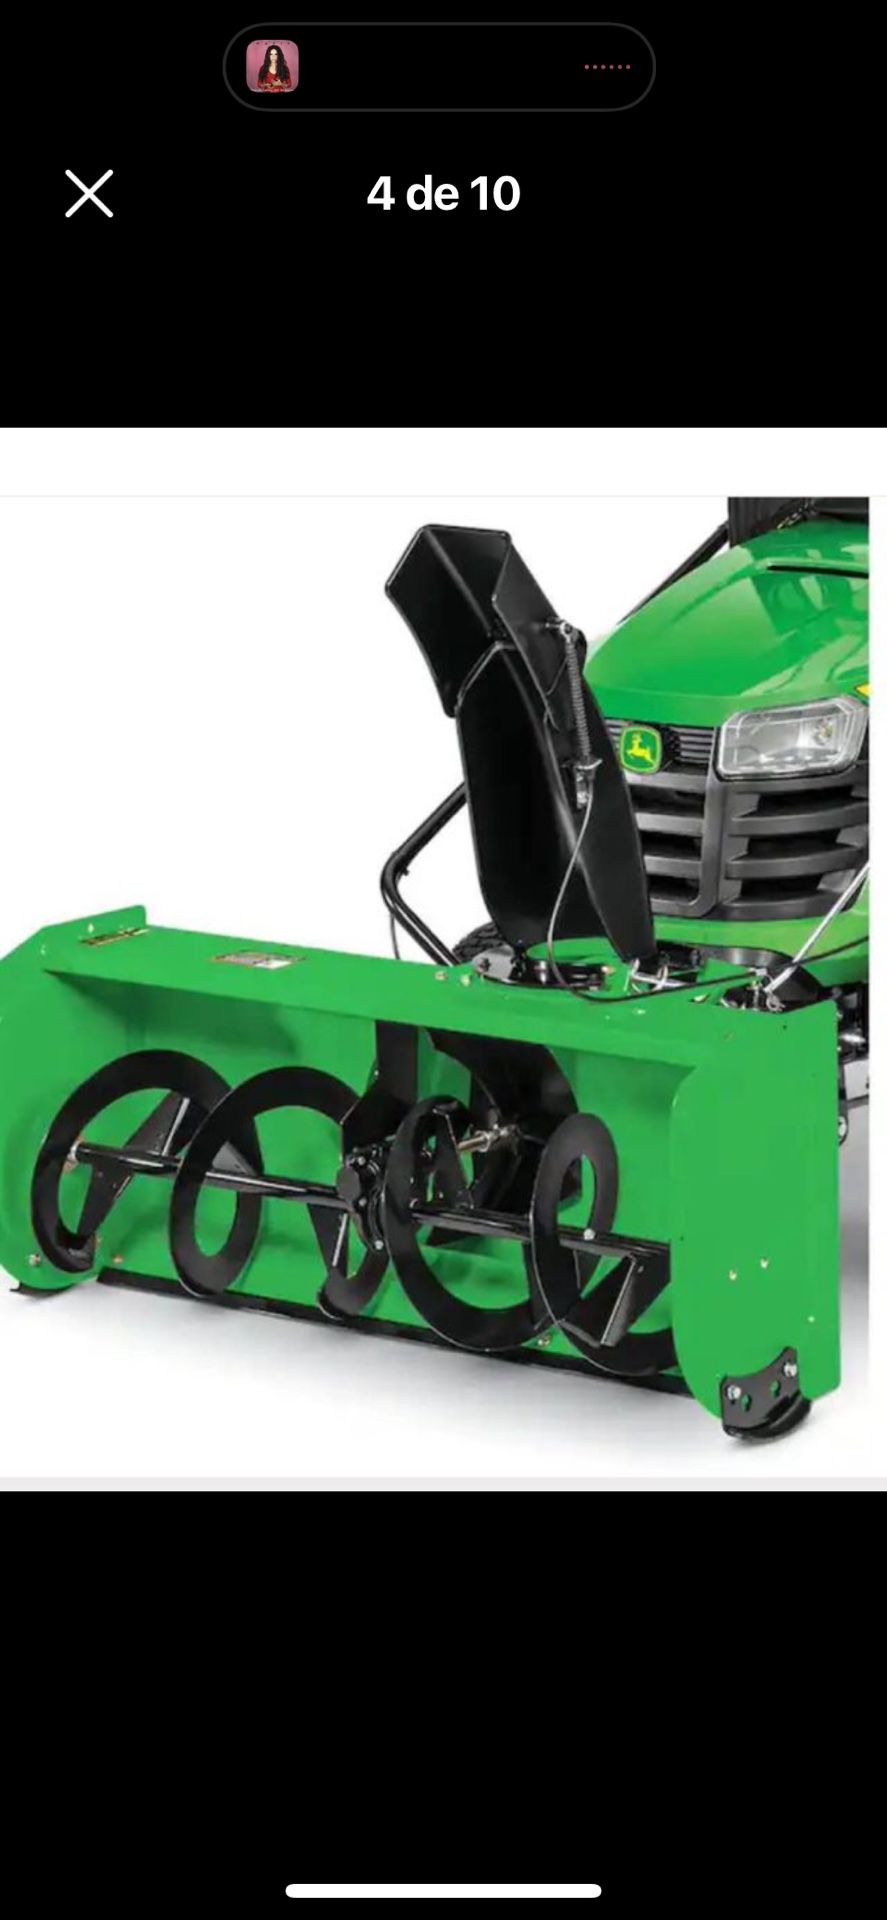 John Deere 44 in. Two-Stage Snow Blower Attachment for 100 Series Tractors